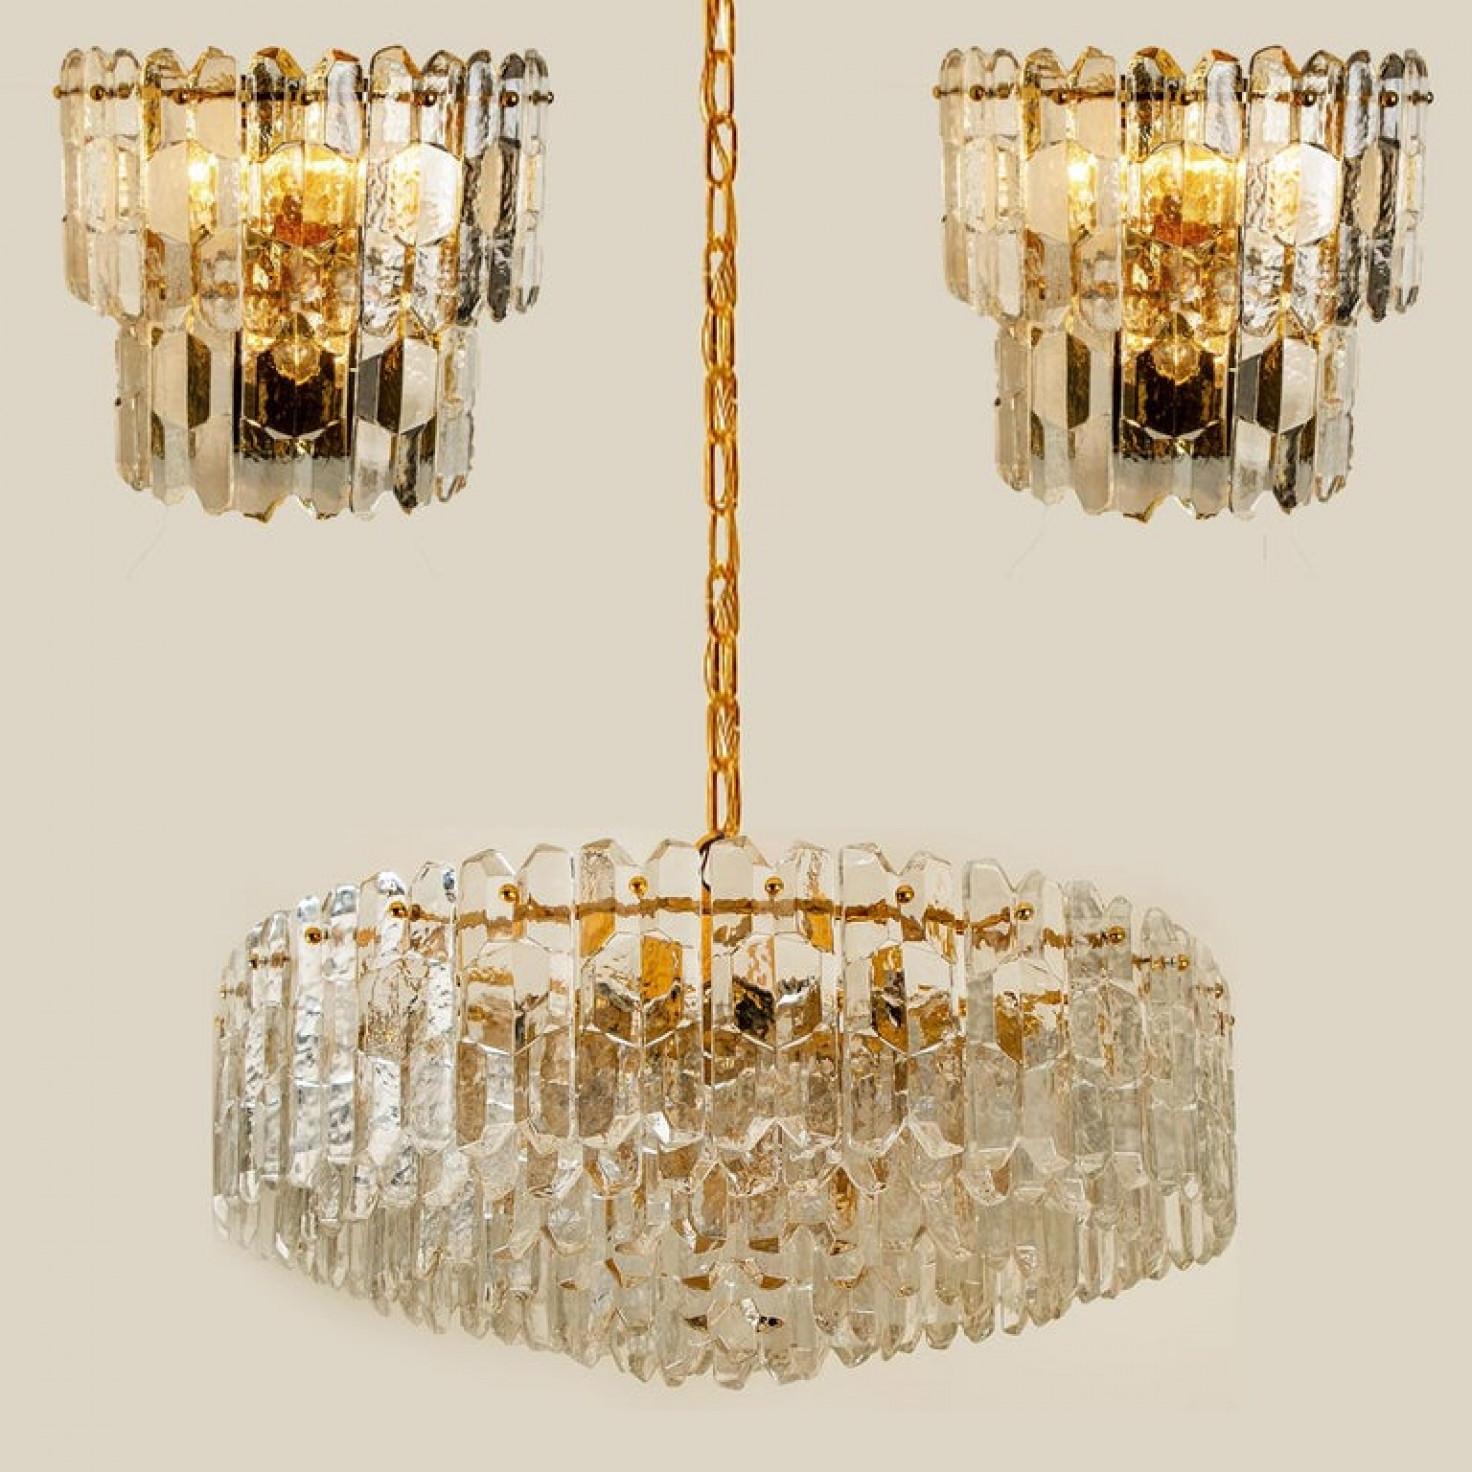 1 of the 2 Huge Kalmar Chandeliers 'Palazzo', Gilded Brass Glass, Austria, 1970s For Sale 1